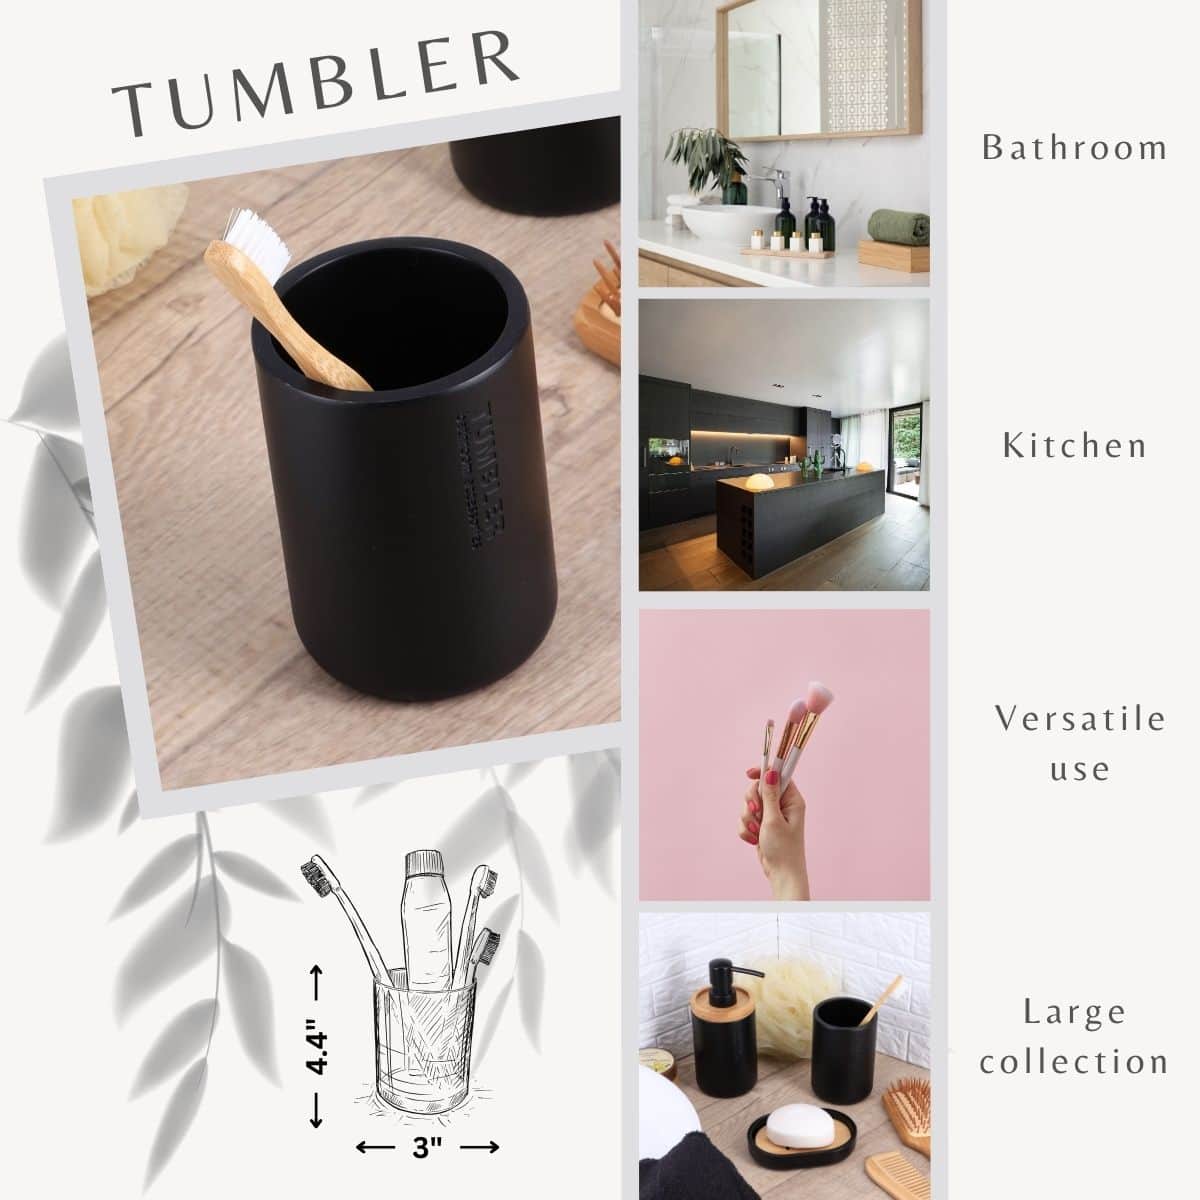 Versatile onyx black tumbler cup for bathroom kitchen toothbrushes make-up brushes combs bathroom essentials